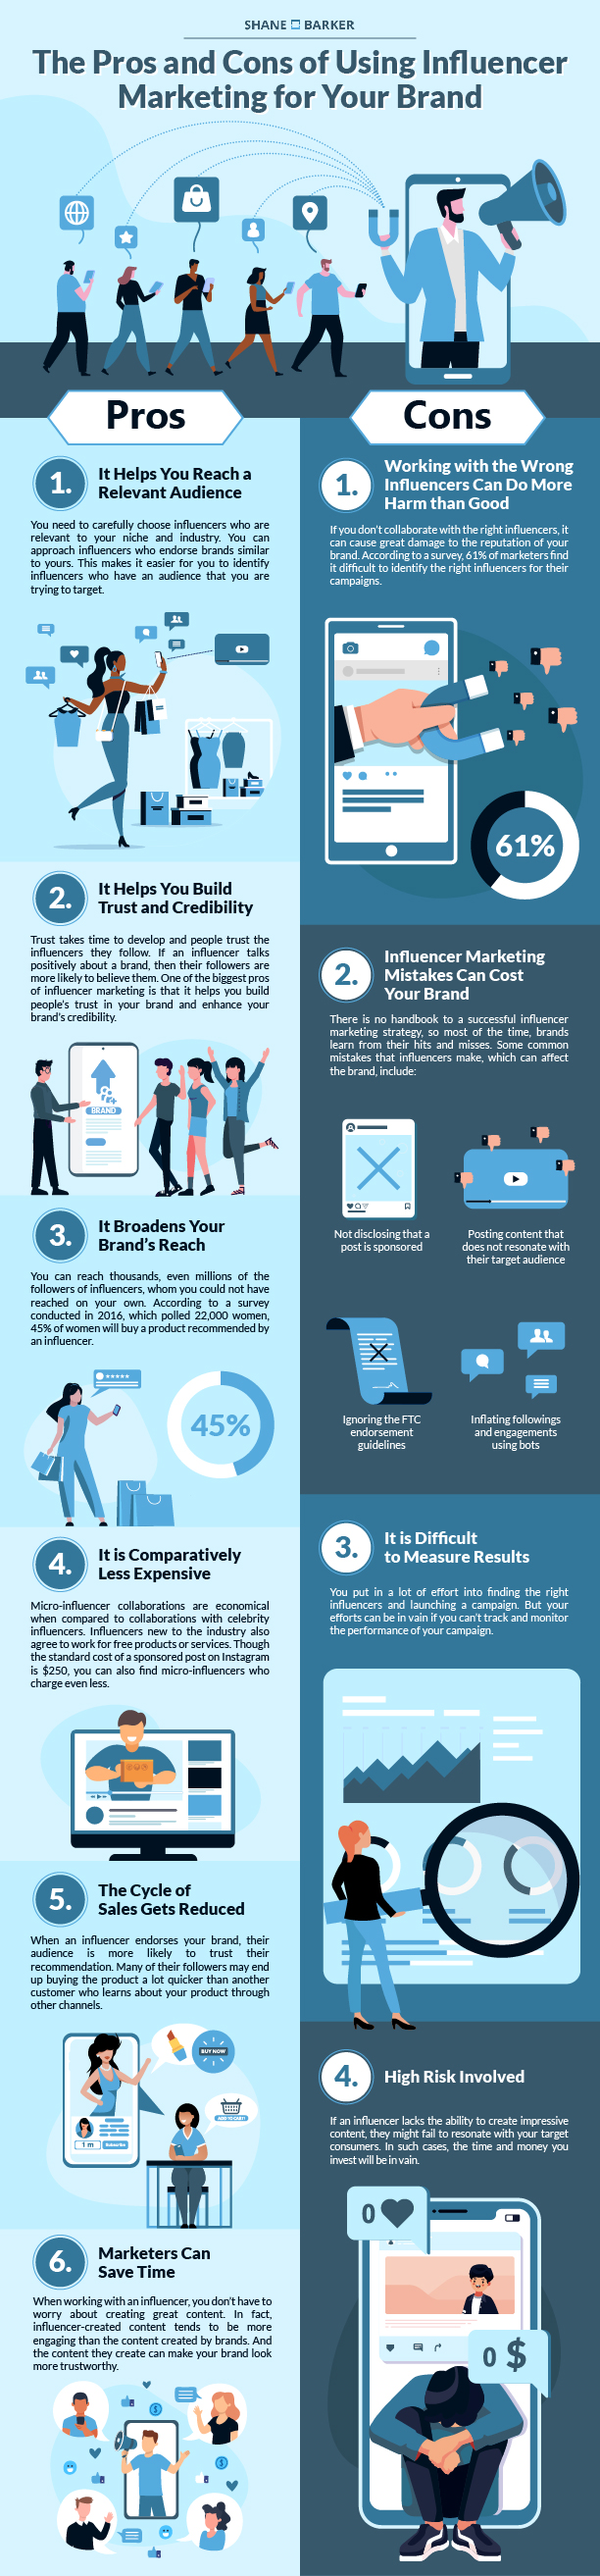 The Pros and Cons of Using Influencer Marketing for Your Brand (Infographic)